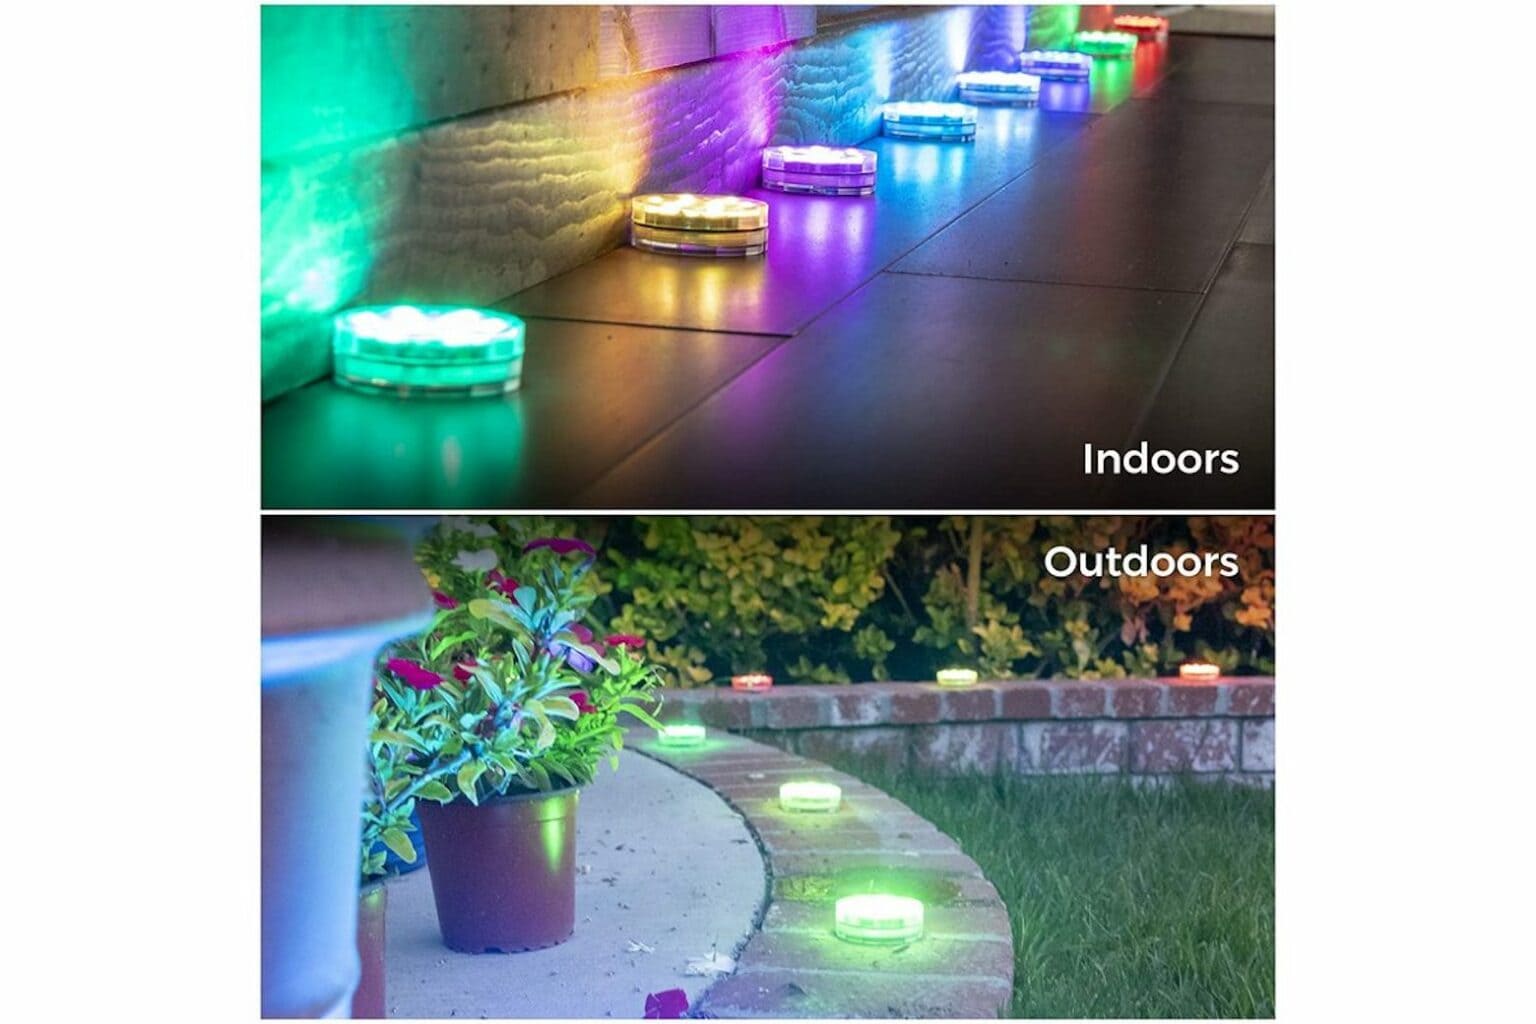 Light up your garden or pool with 12 waterproof LEDs.